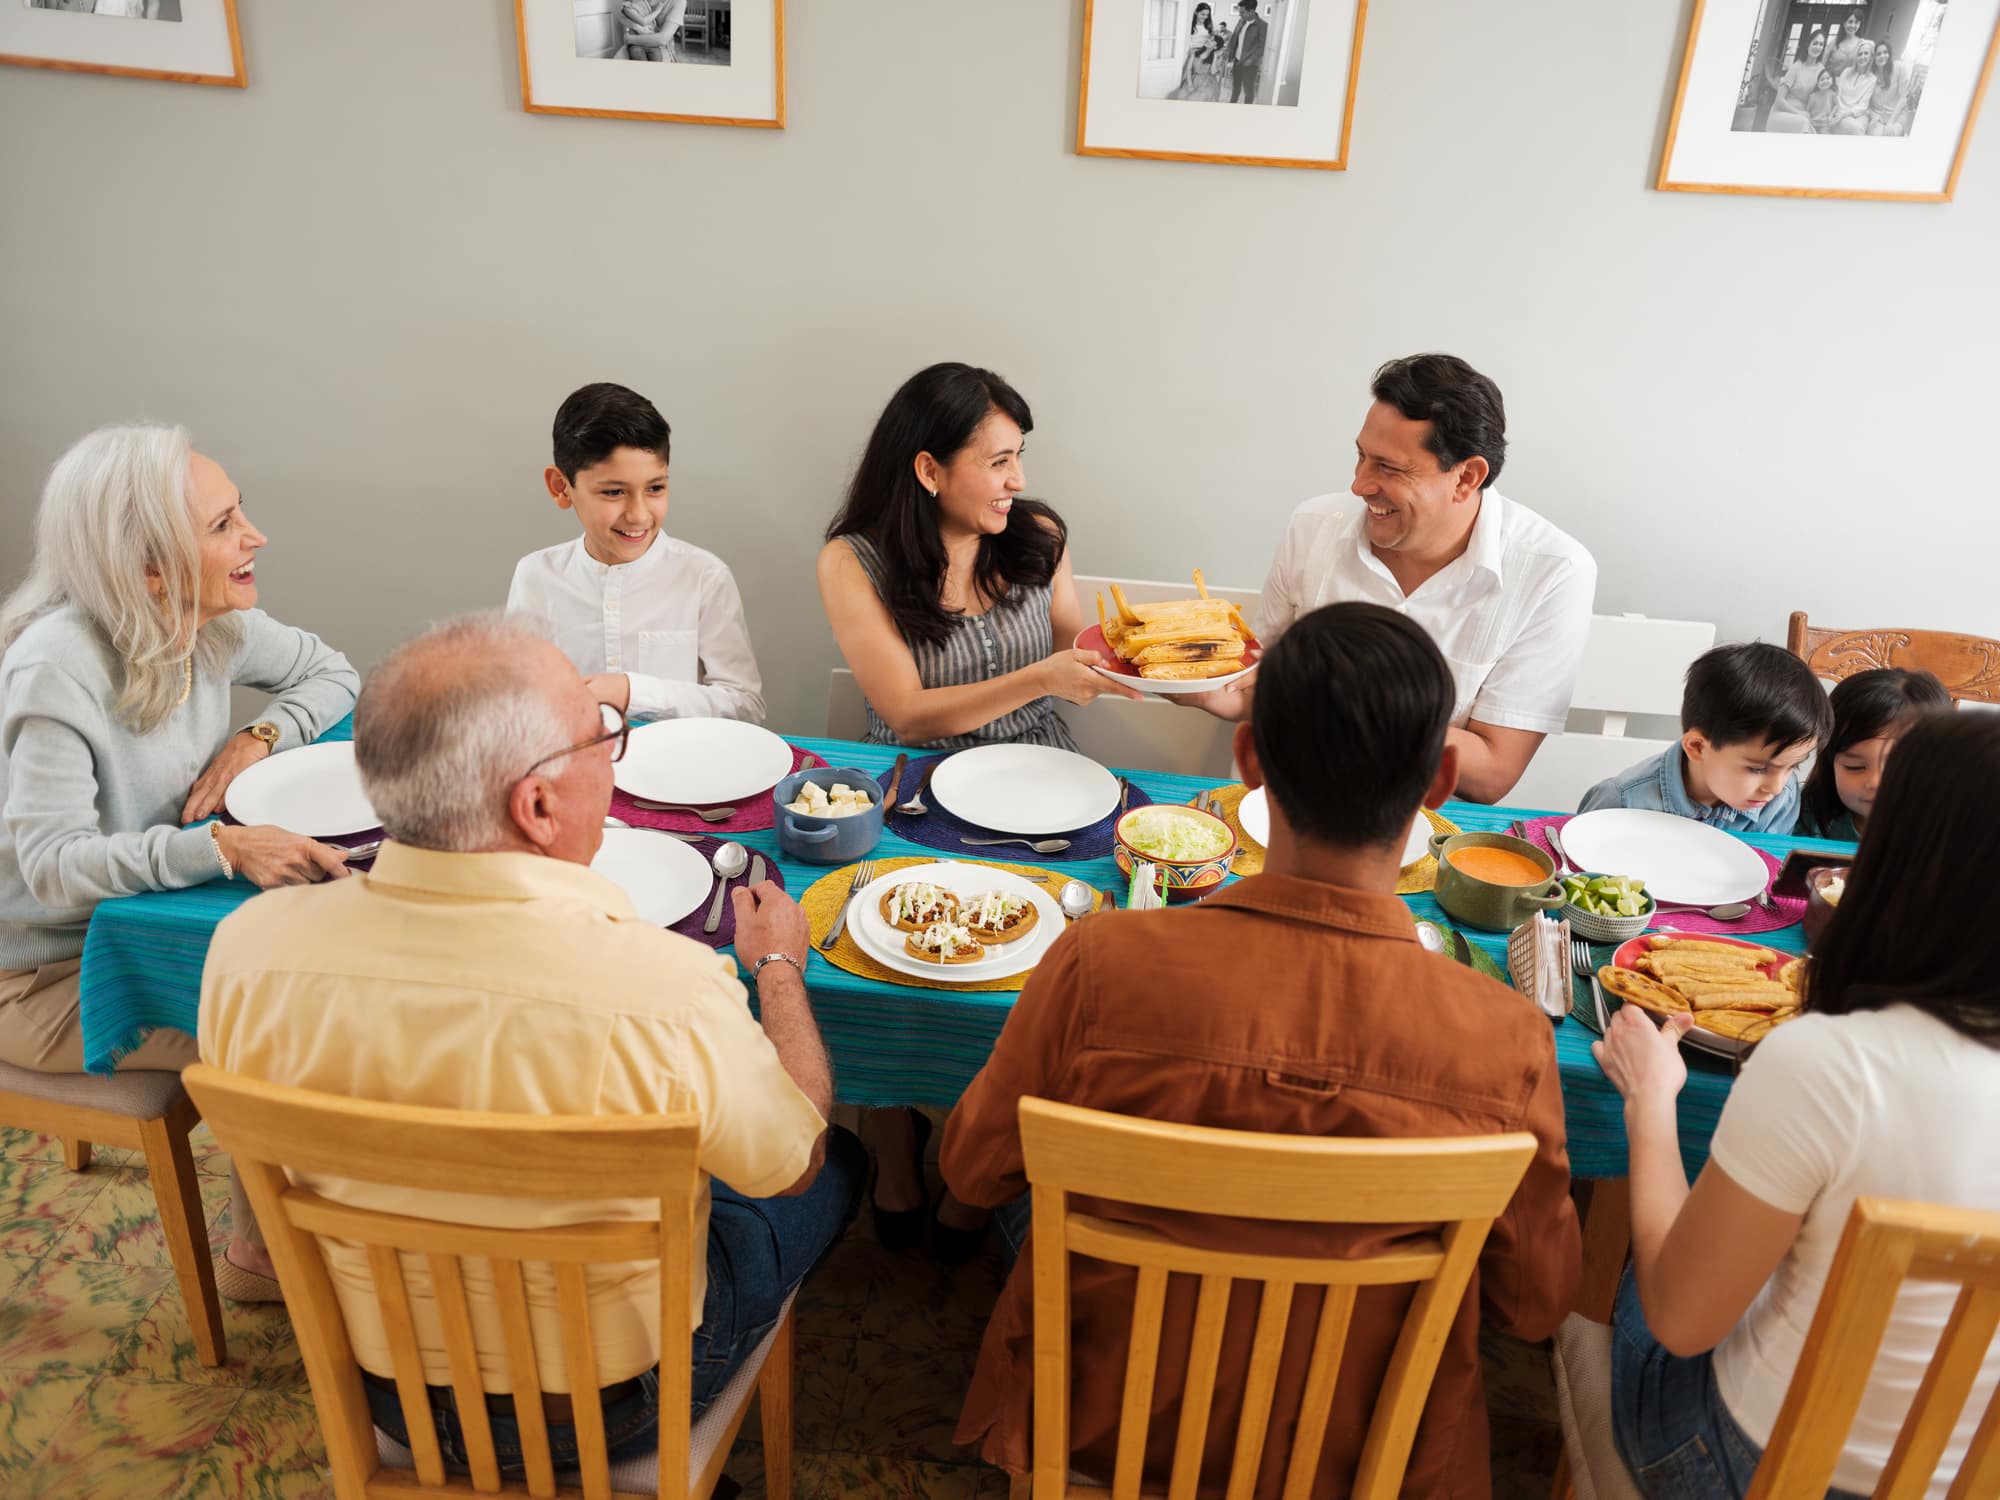 A happy intergenerational mexican family passing food to each other at the table and smiling.